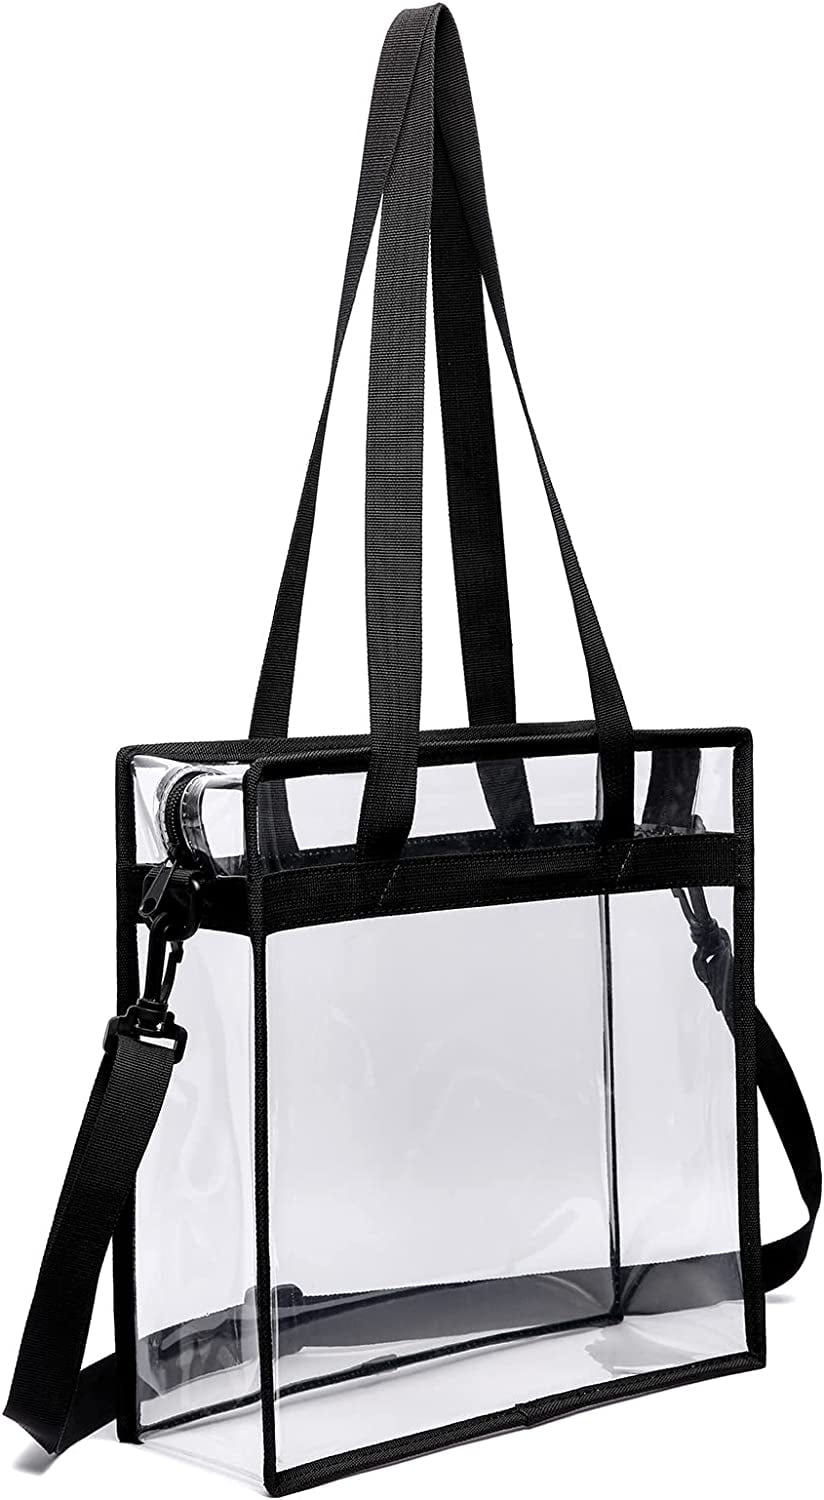 Clear Bags, Large Clear Plastic Tote Bag with Handles PVC Storage ...